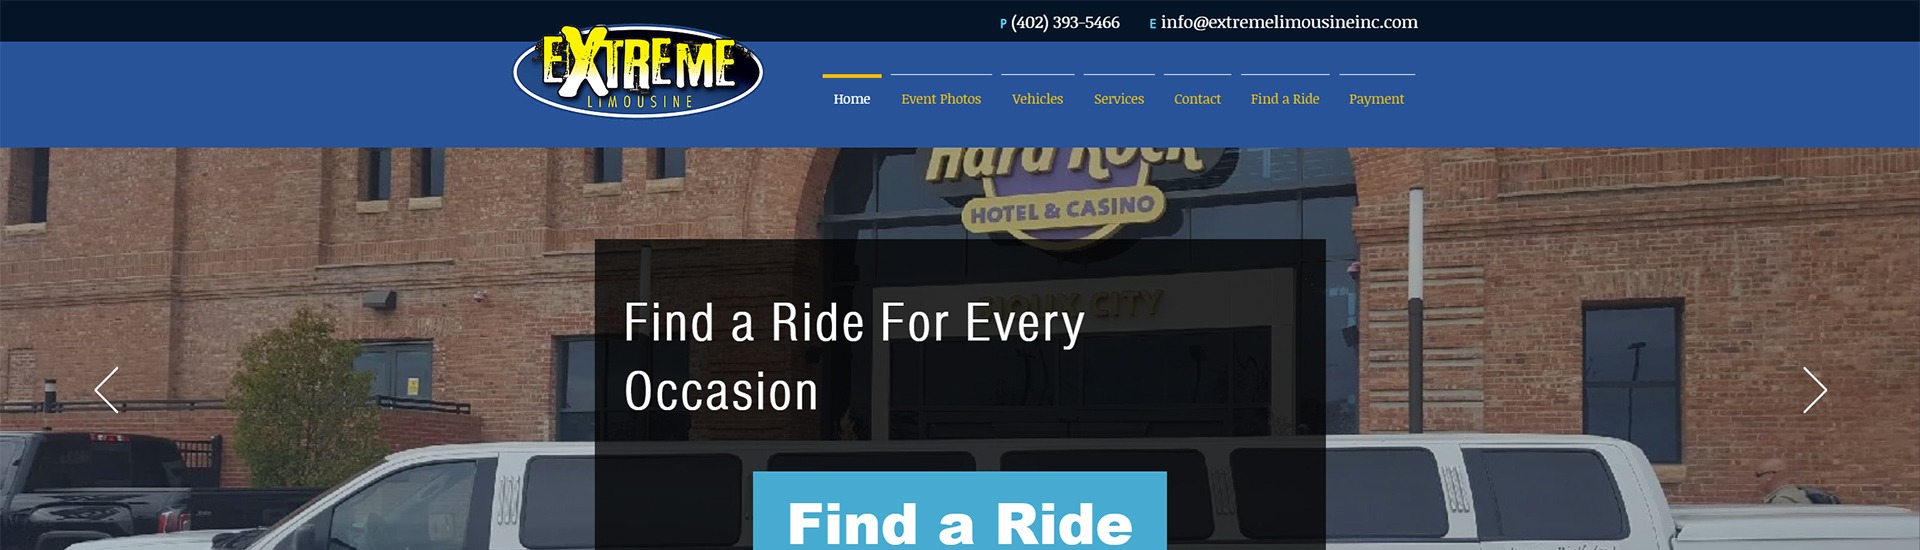 Extreme Limousine Home Page